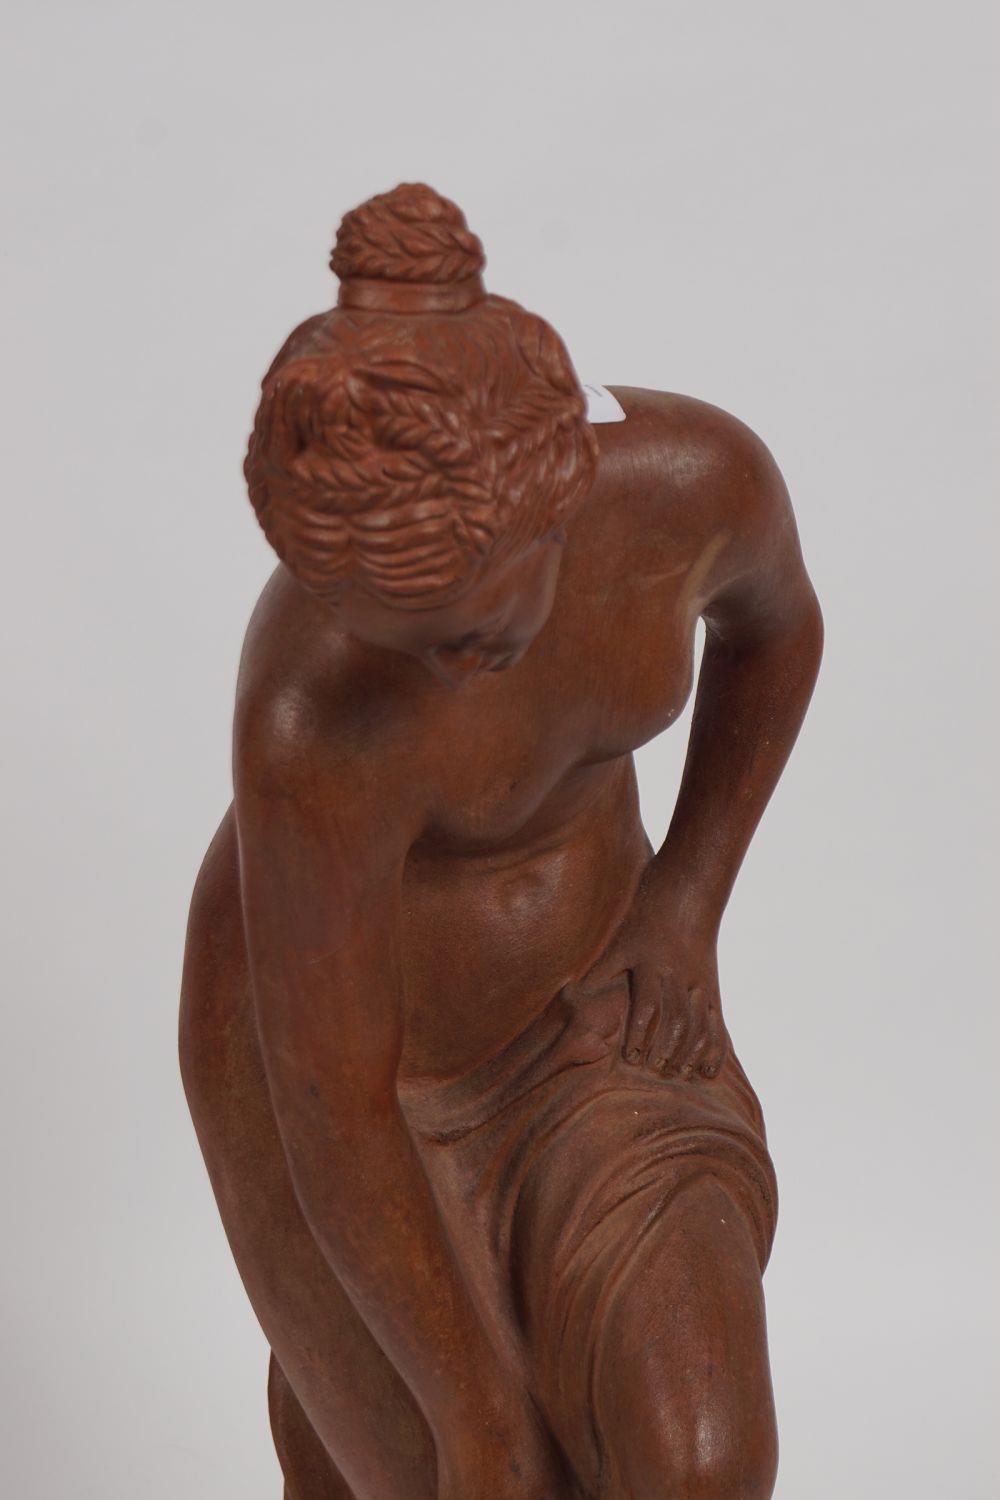 LARGE 19TH-CENTURY TERRACOTTA SCULPTURE - Image 2 of 2